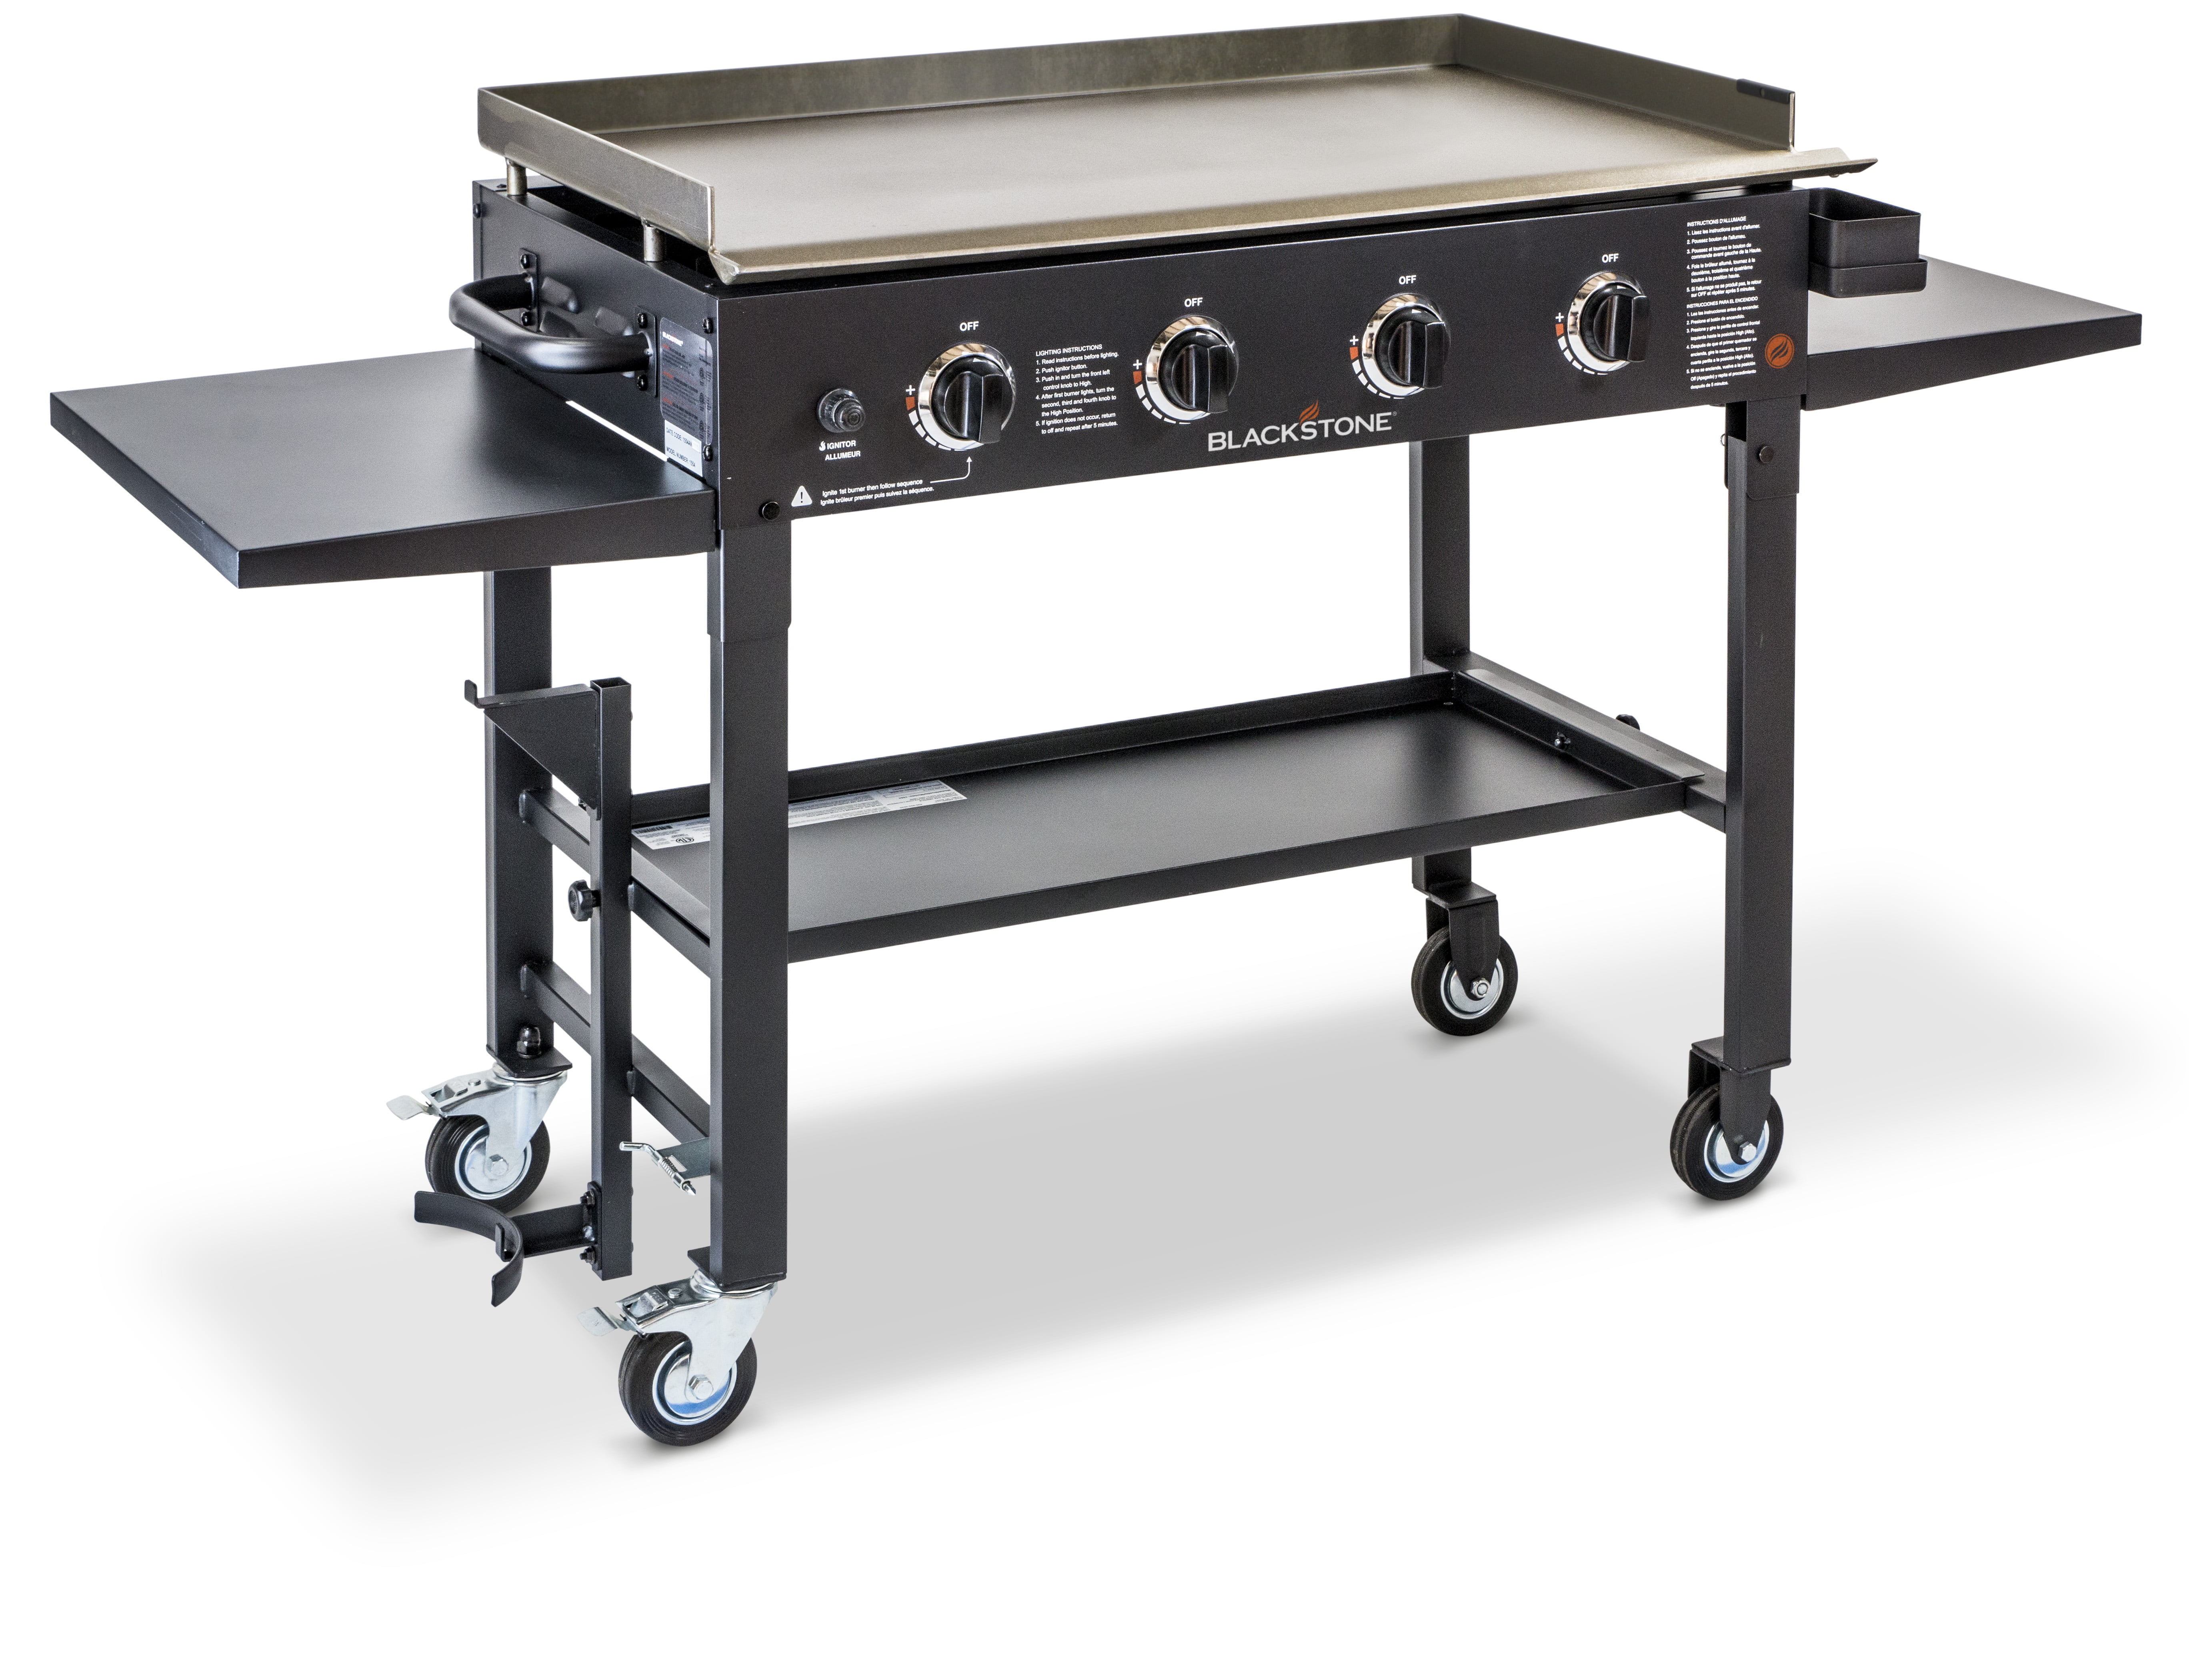 Blackstone 36" Griddle Cooking Station Outdoor Patio Stainless Steel Stainless Steel Outdoor Flat Top Grill